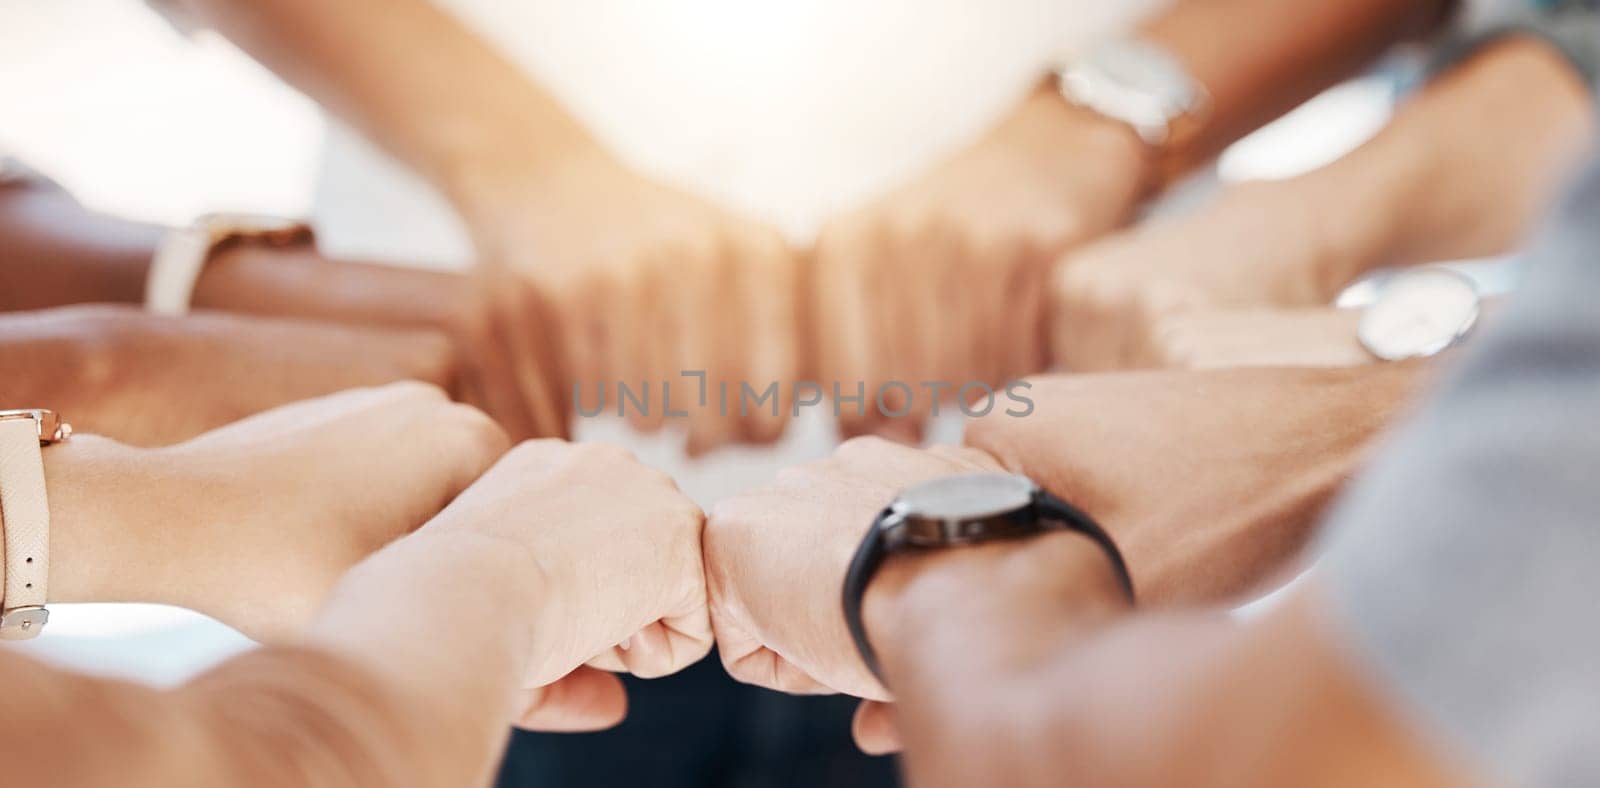 Group, circle and fist bump with team building closeup, community or collaboration for goals in office. Business people, synergy and productivity with solidarity, agreement or networking in workplace.